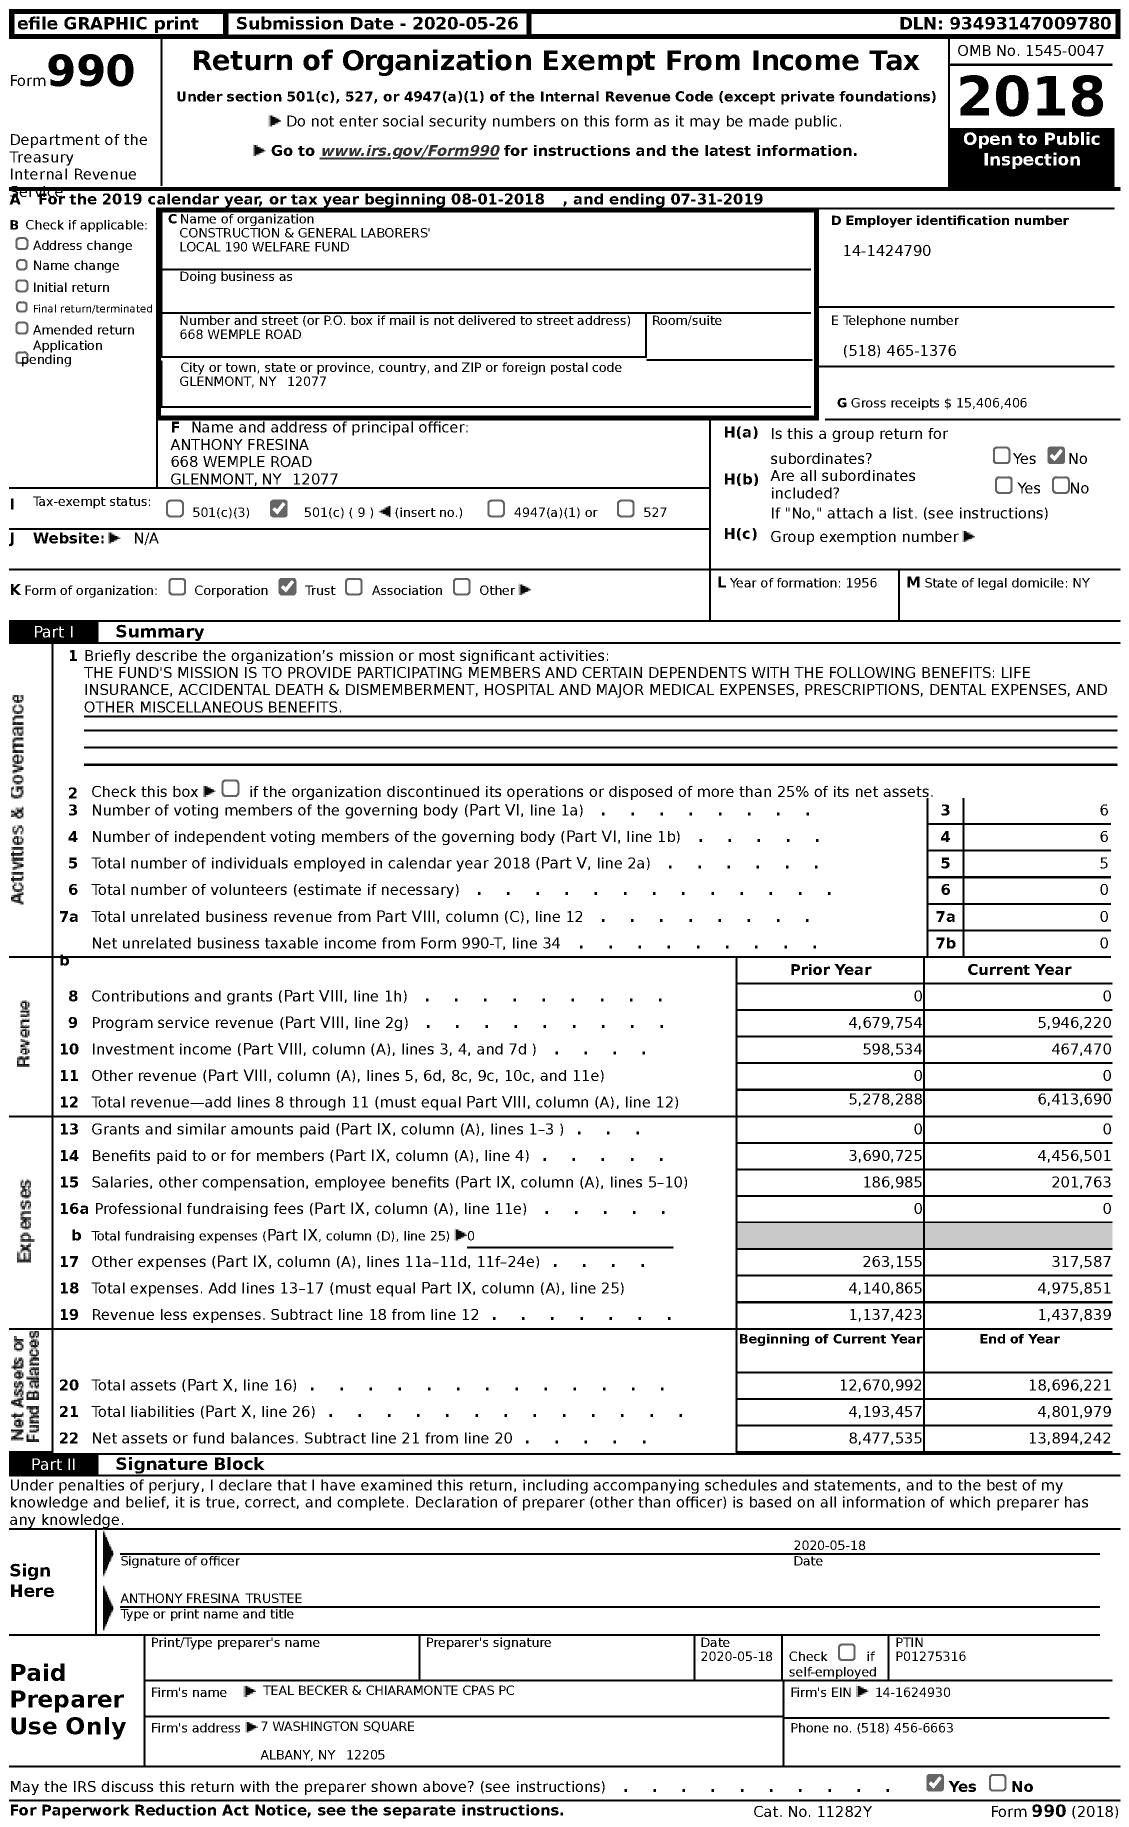 Image of first page of 2018 Form 990 for Construction and General Laborers' Local 190 Welfare Fund